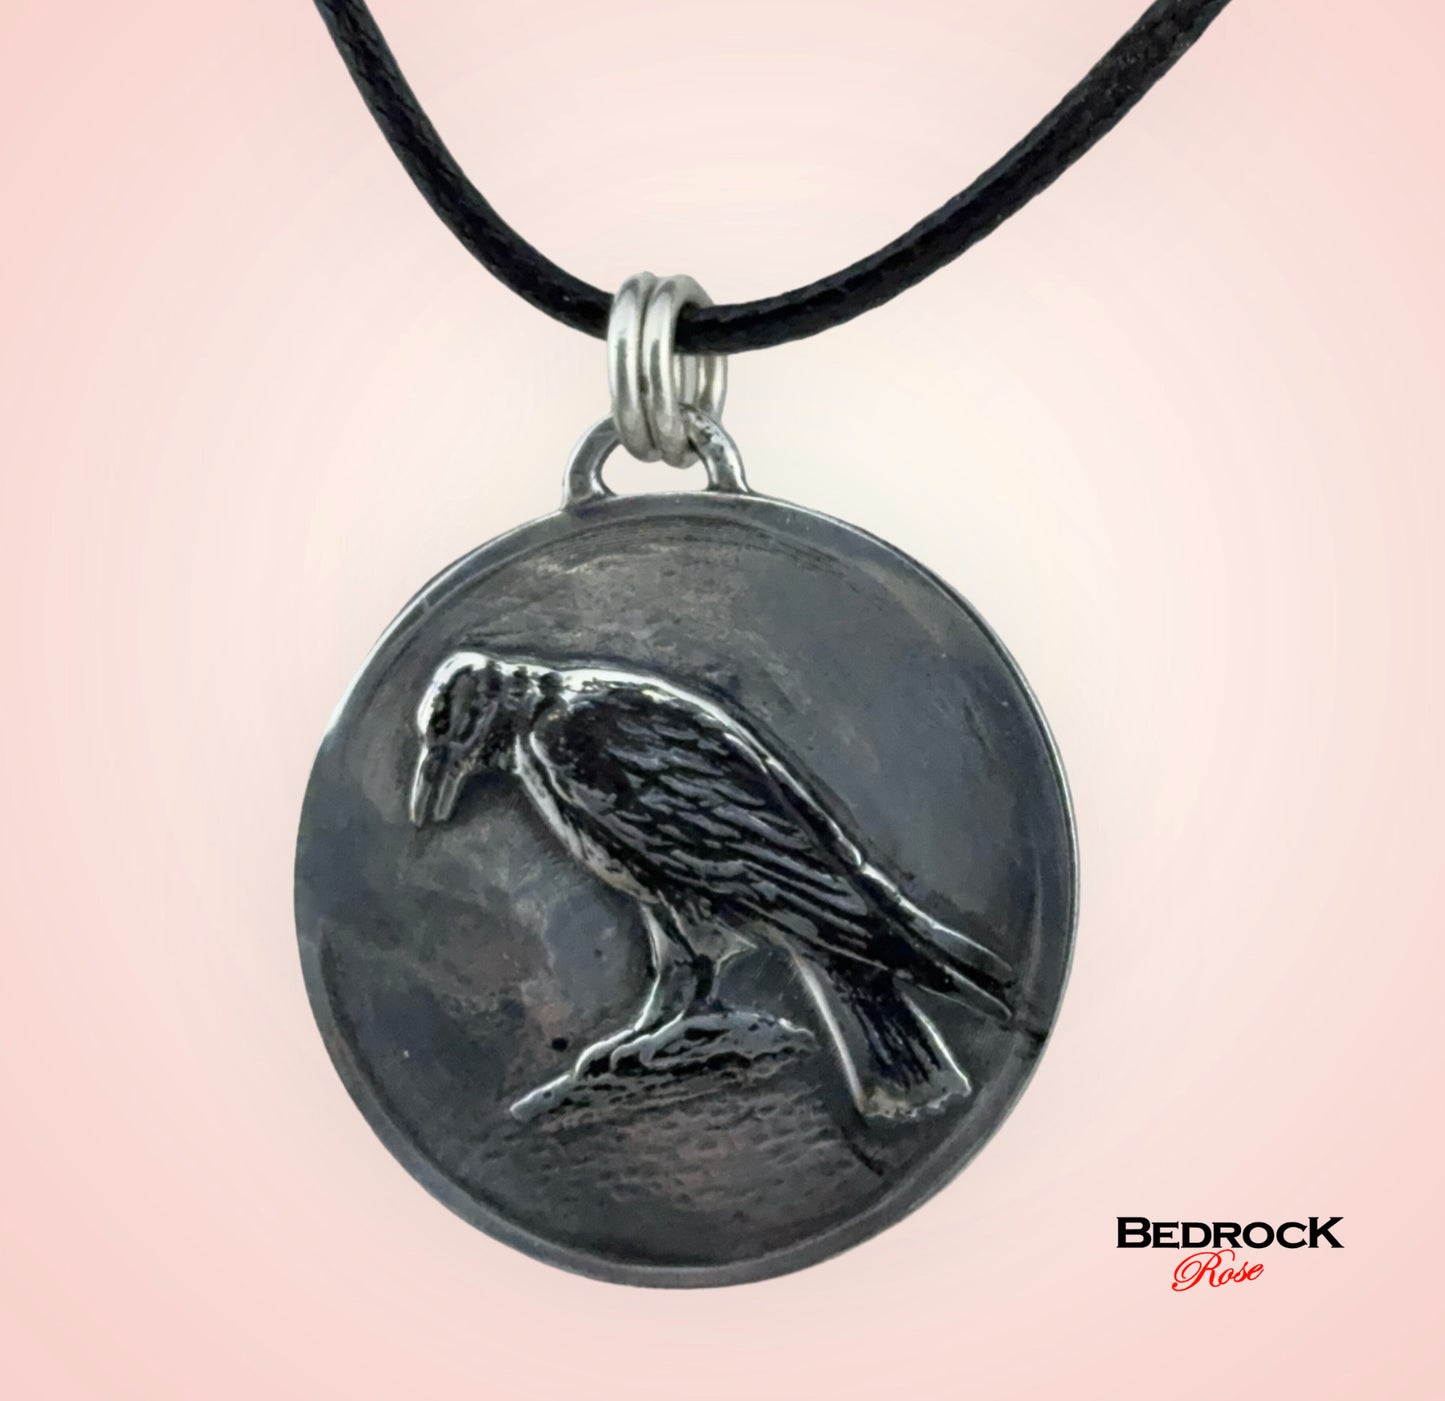 Close-up view of detailed crow design on the round silver pendant